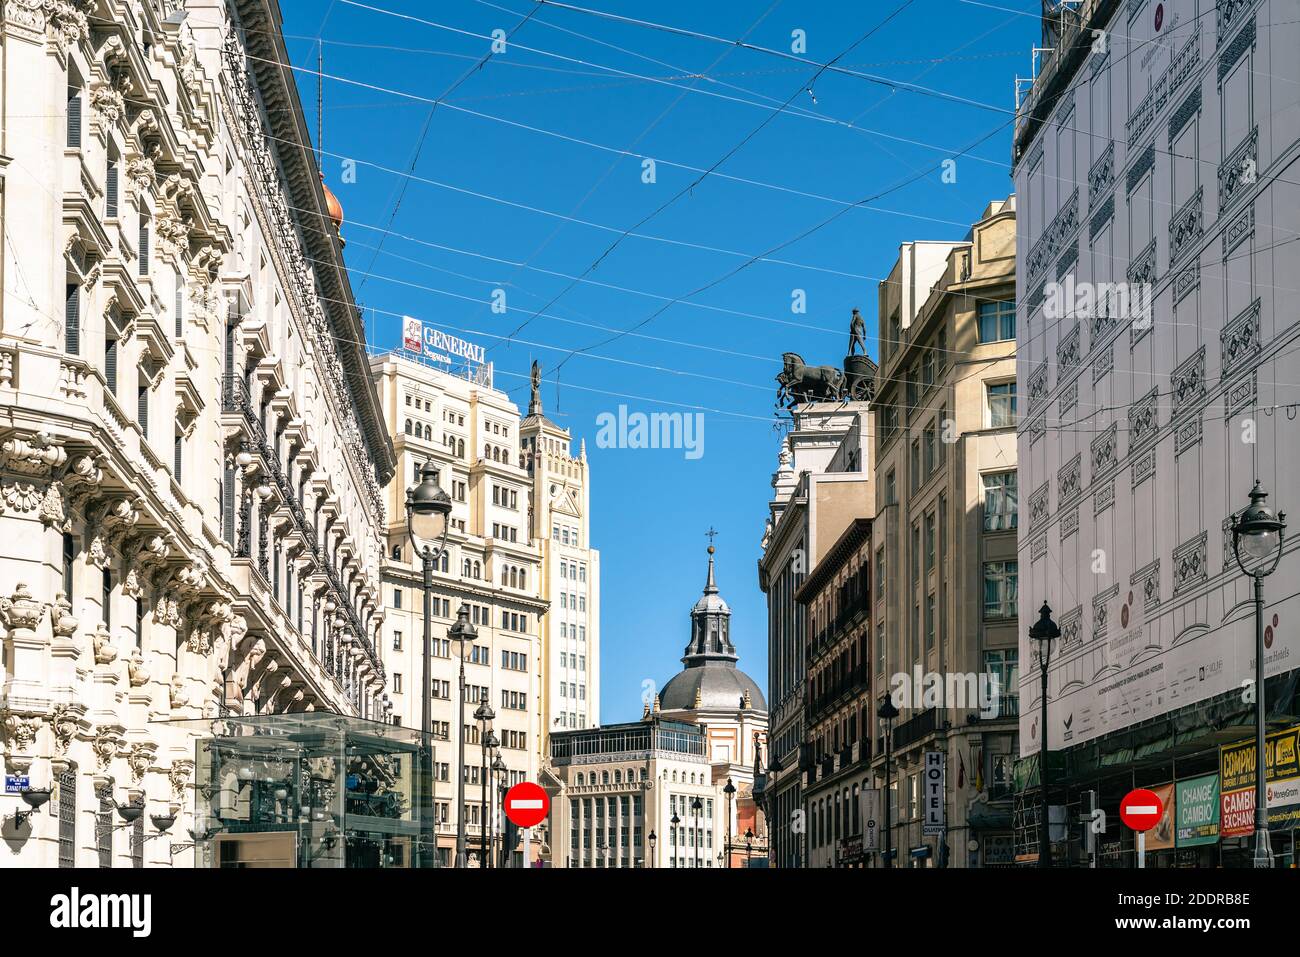 Madrid, Spain - October 11, 2020:Four Seasons Private Residences in Canalejas Square in Centro district. Stock Photo